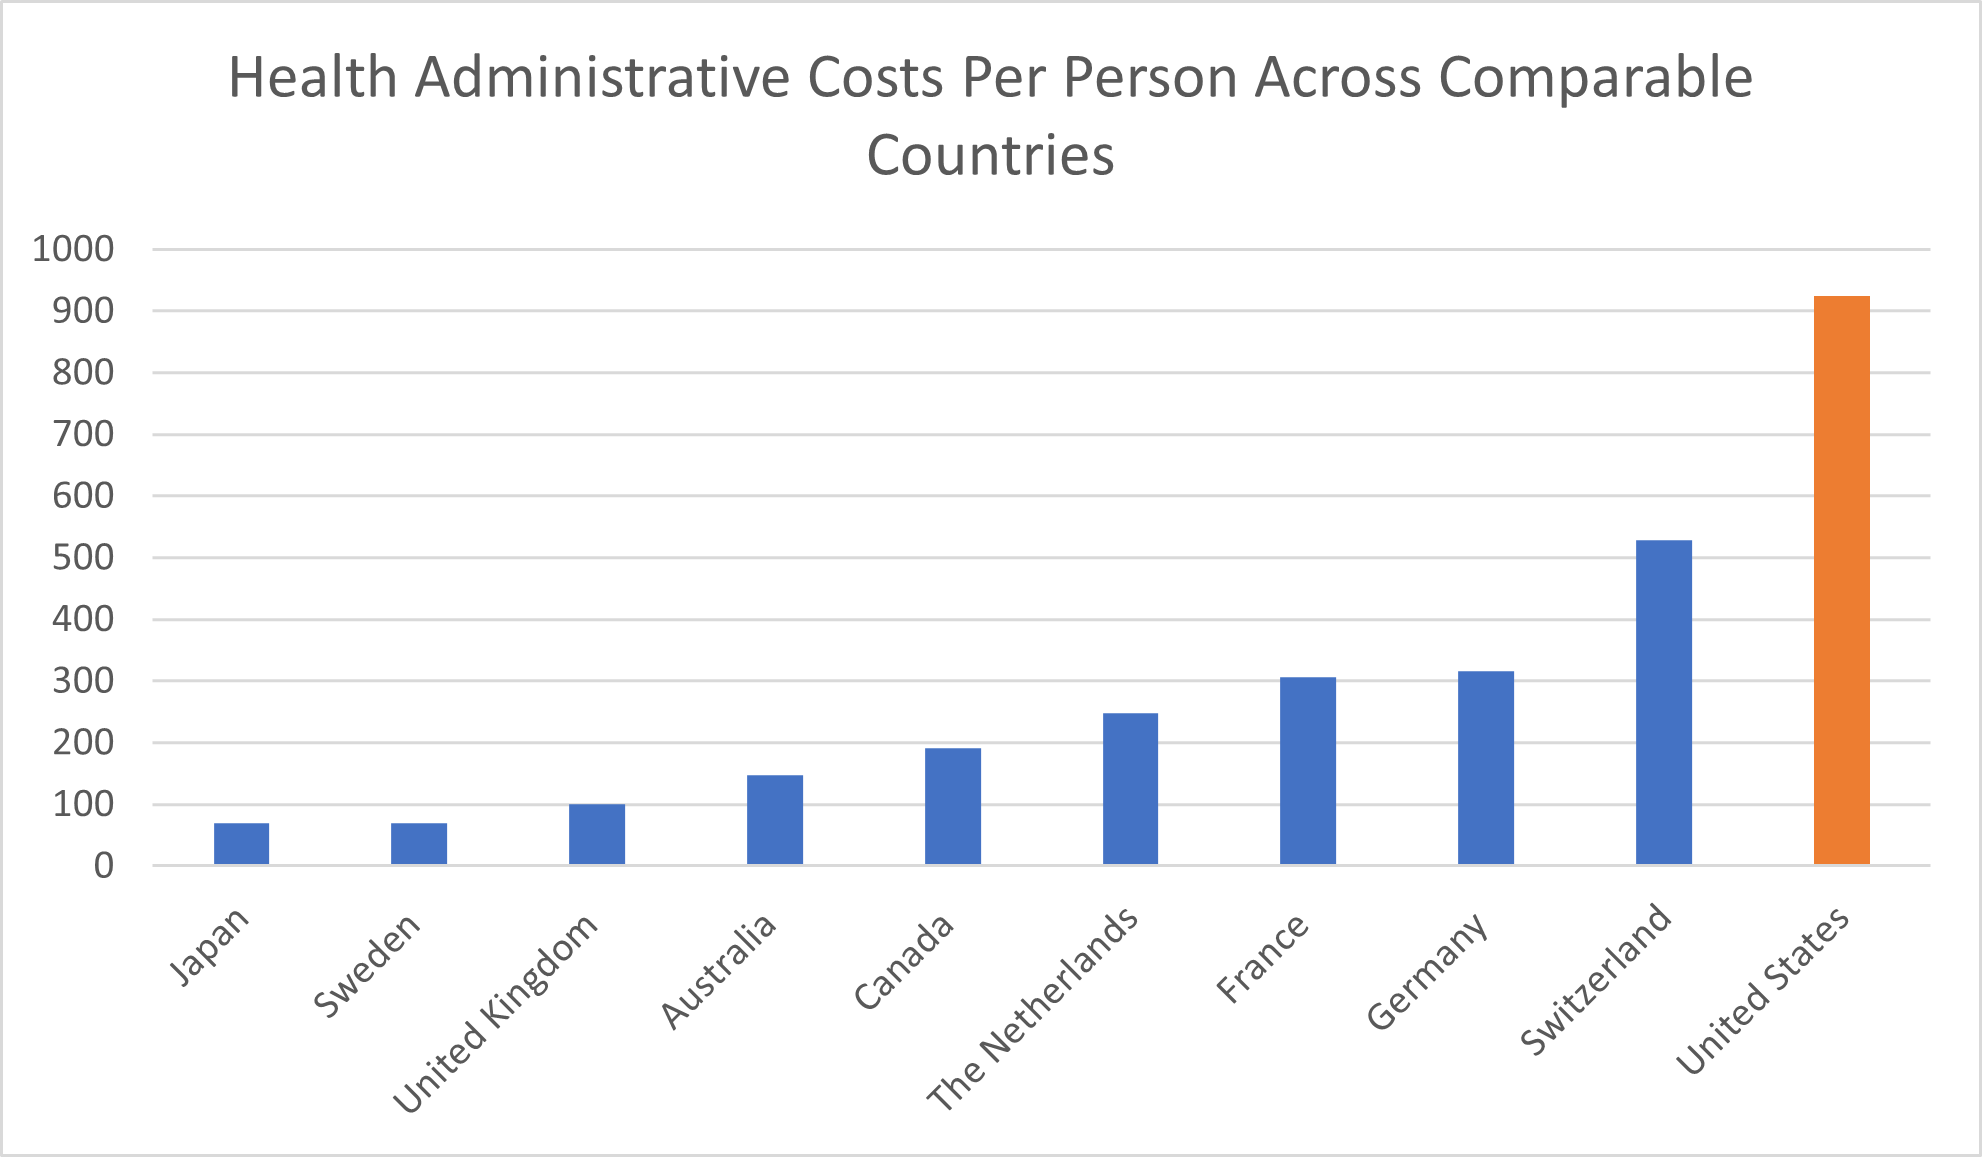 Health Administrative Costs Per Person Across Comparable Countries